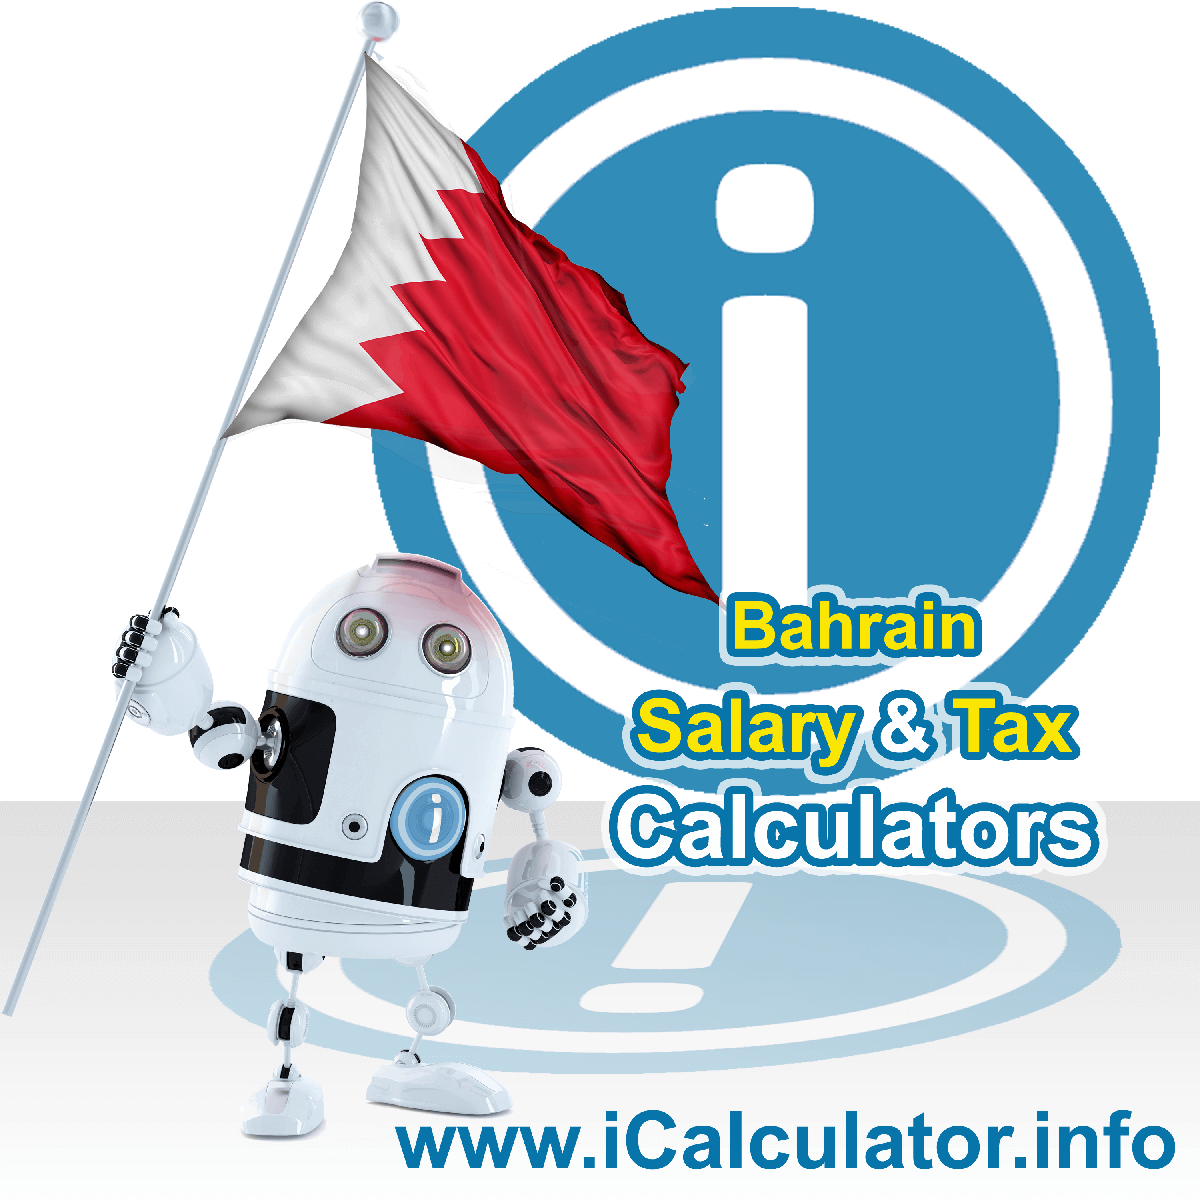 Bahrain Salary Calculator. This image shows the Bahrainese flag and information relating to the tax formula for the Bahrain Tax Calculator